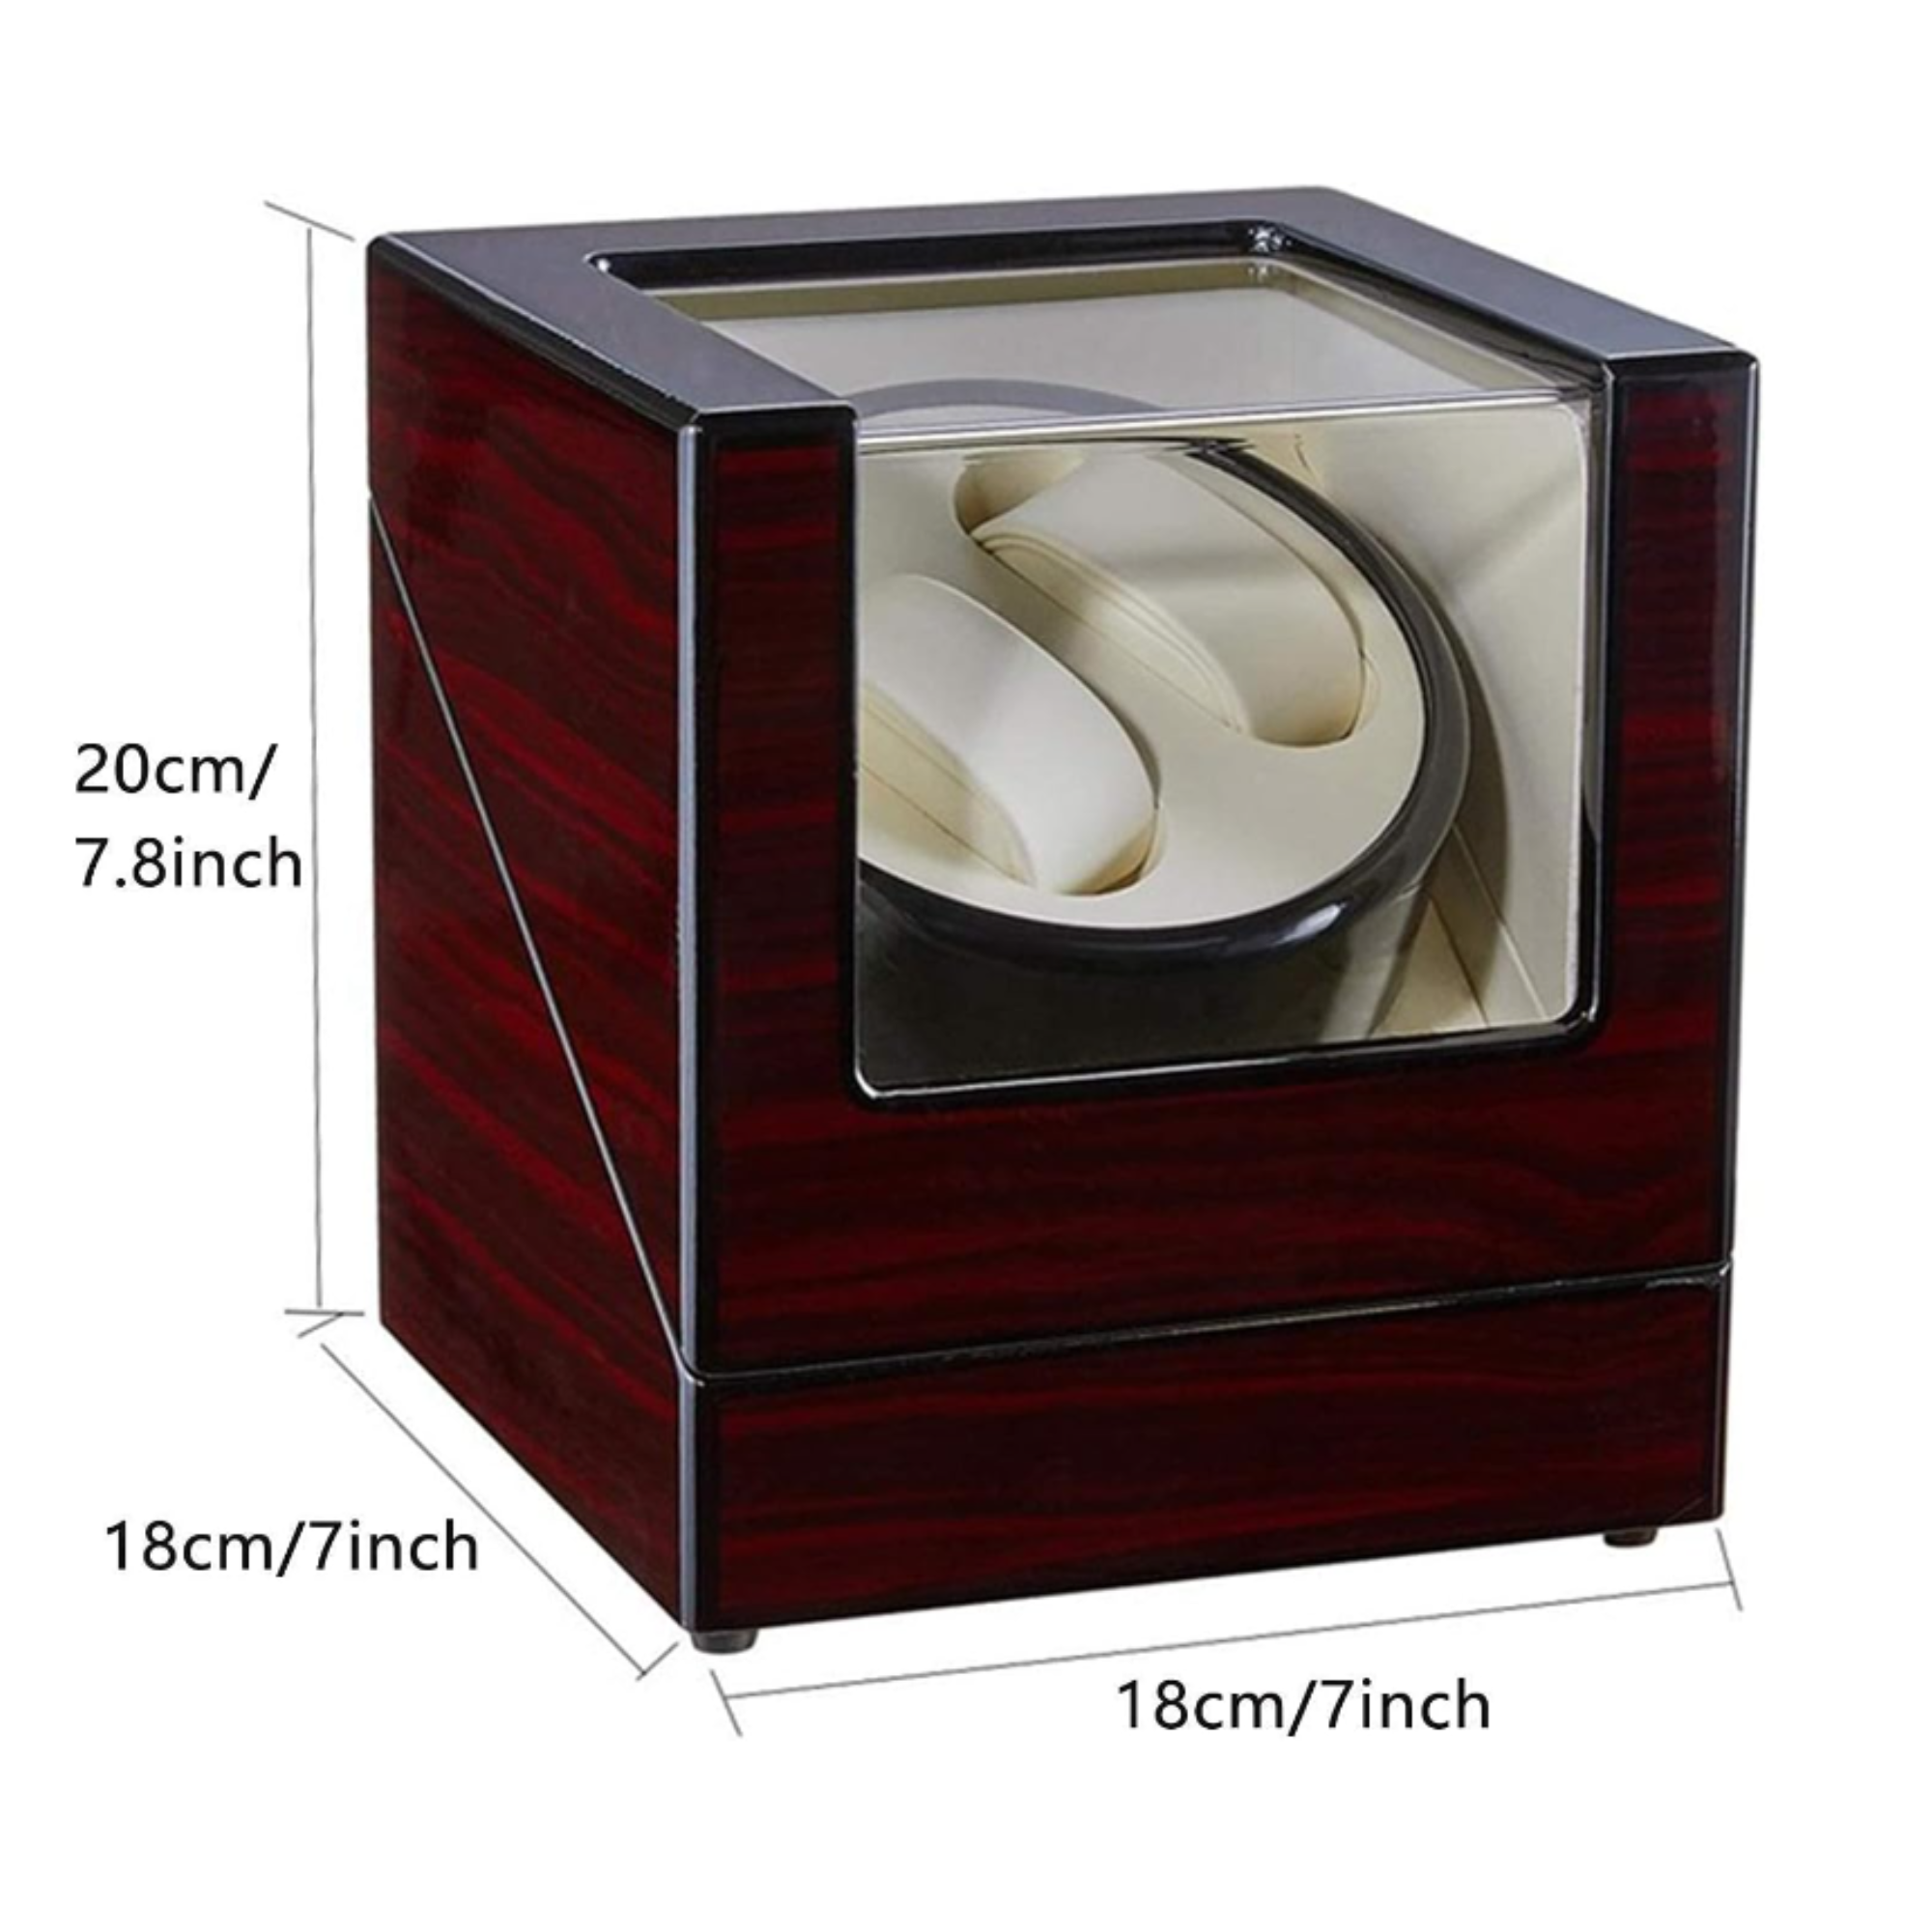 Automatic Double Watch Winder Box Luxurious Wooden Shell Piano Paint Exterior & Silent Wrist Watch Motor: Maroon/Black-Carbon FIber